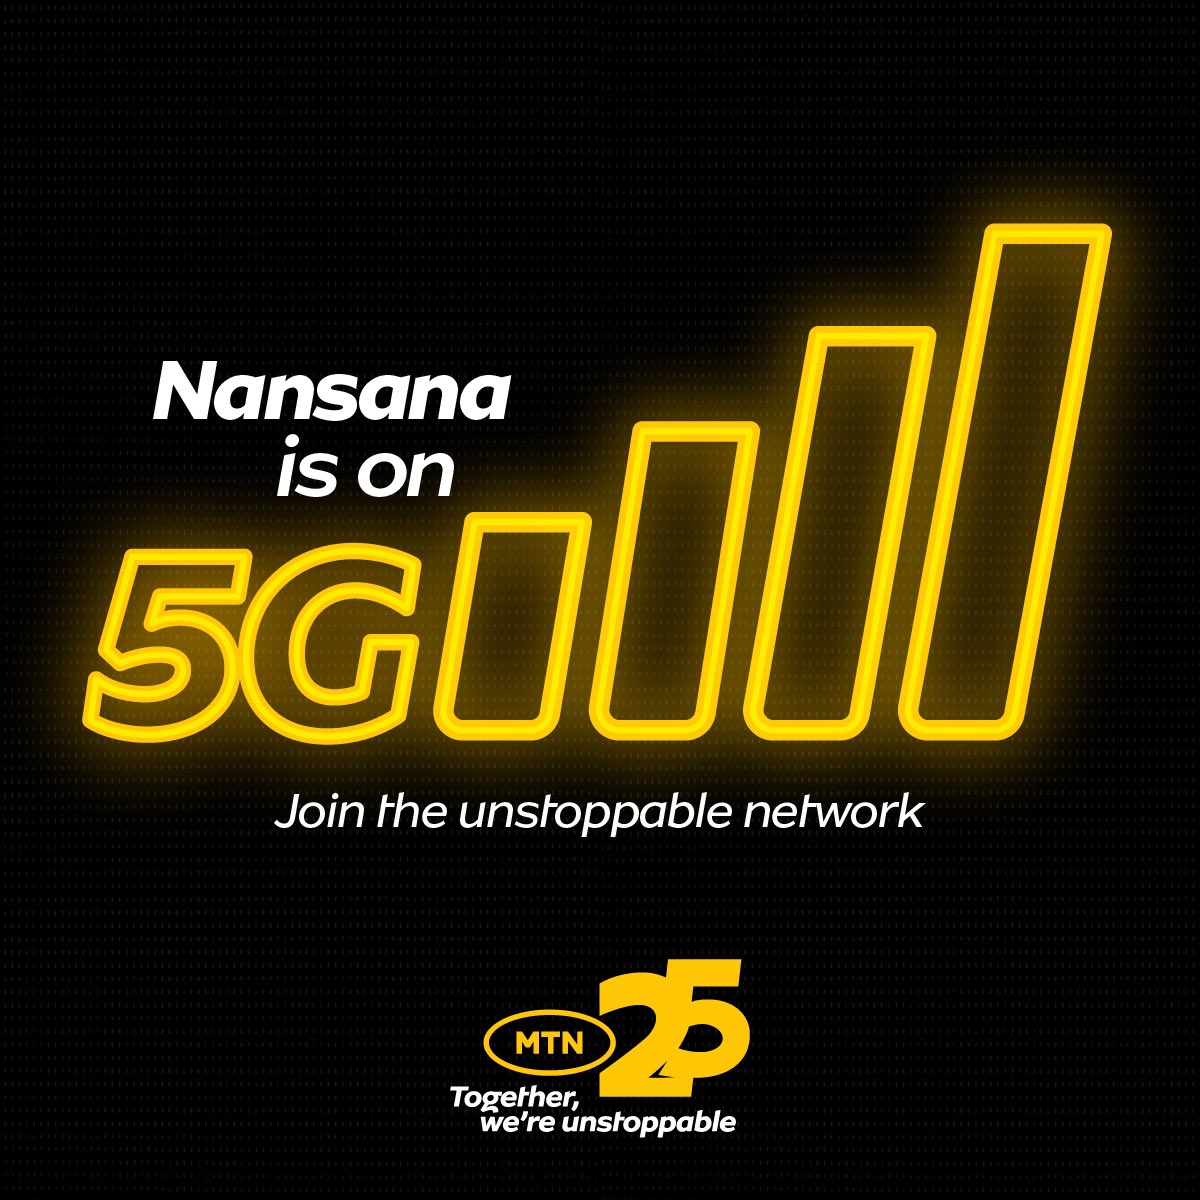 #MTN5G is now in Nansana☺️ Join the unstoppable network and enjoy surfing at its peak.
#TogetherWeAreUnstoppable